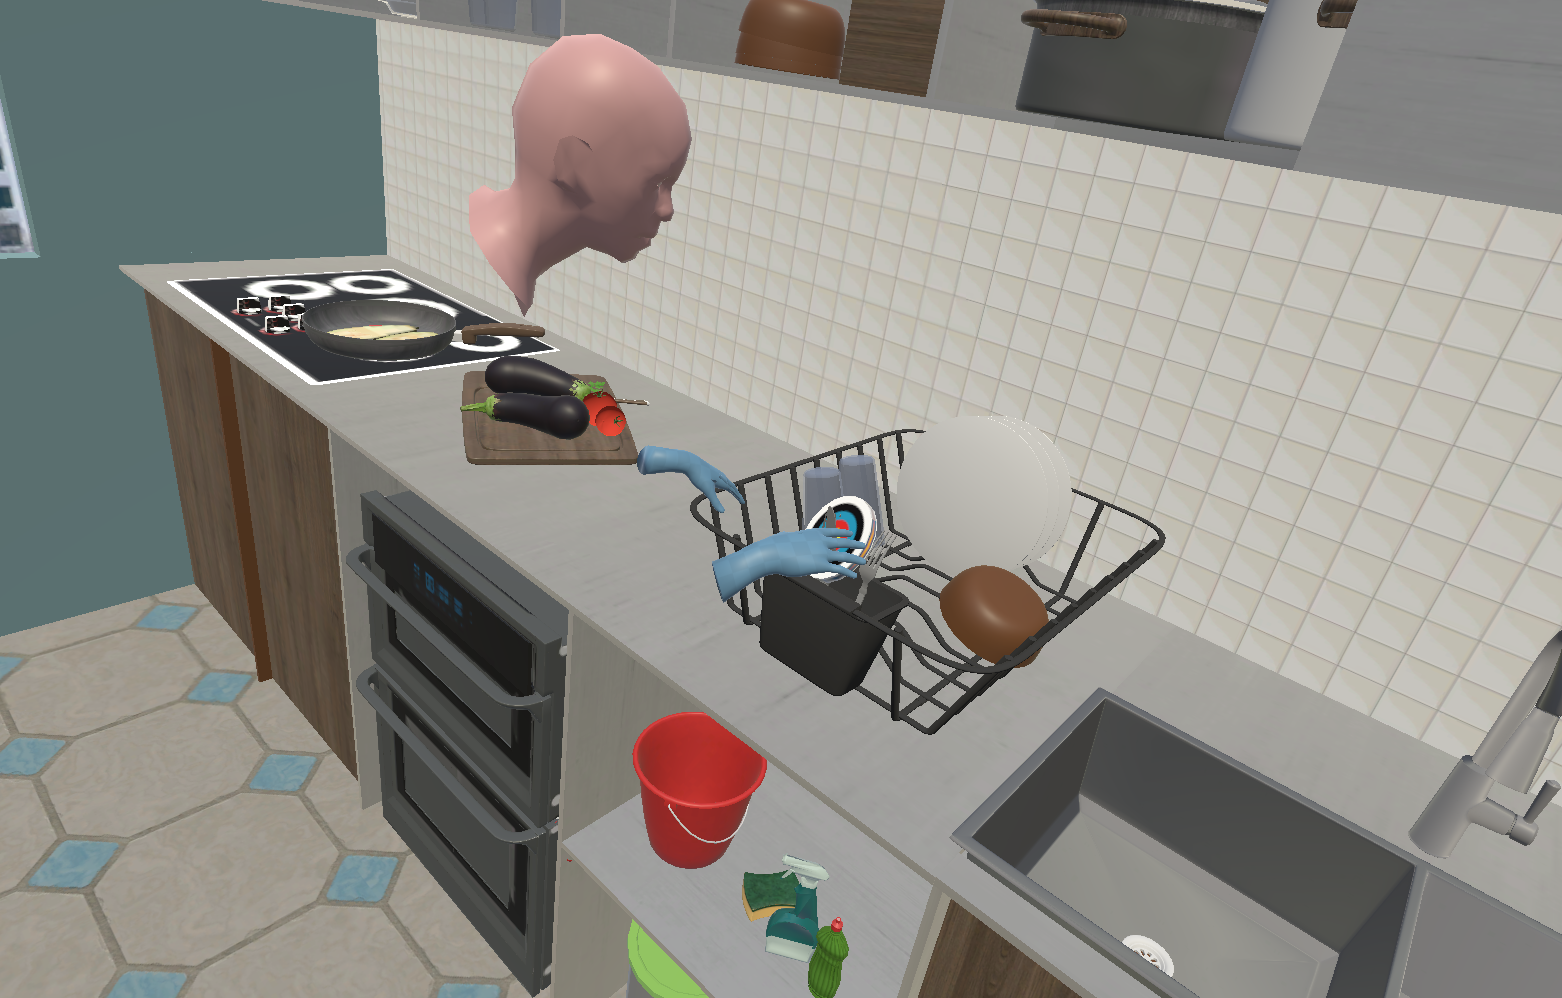 View of a kitchen with a virtual avatar